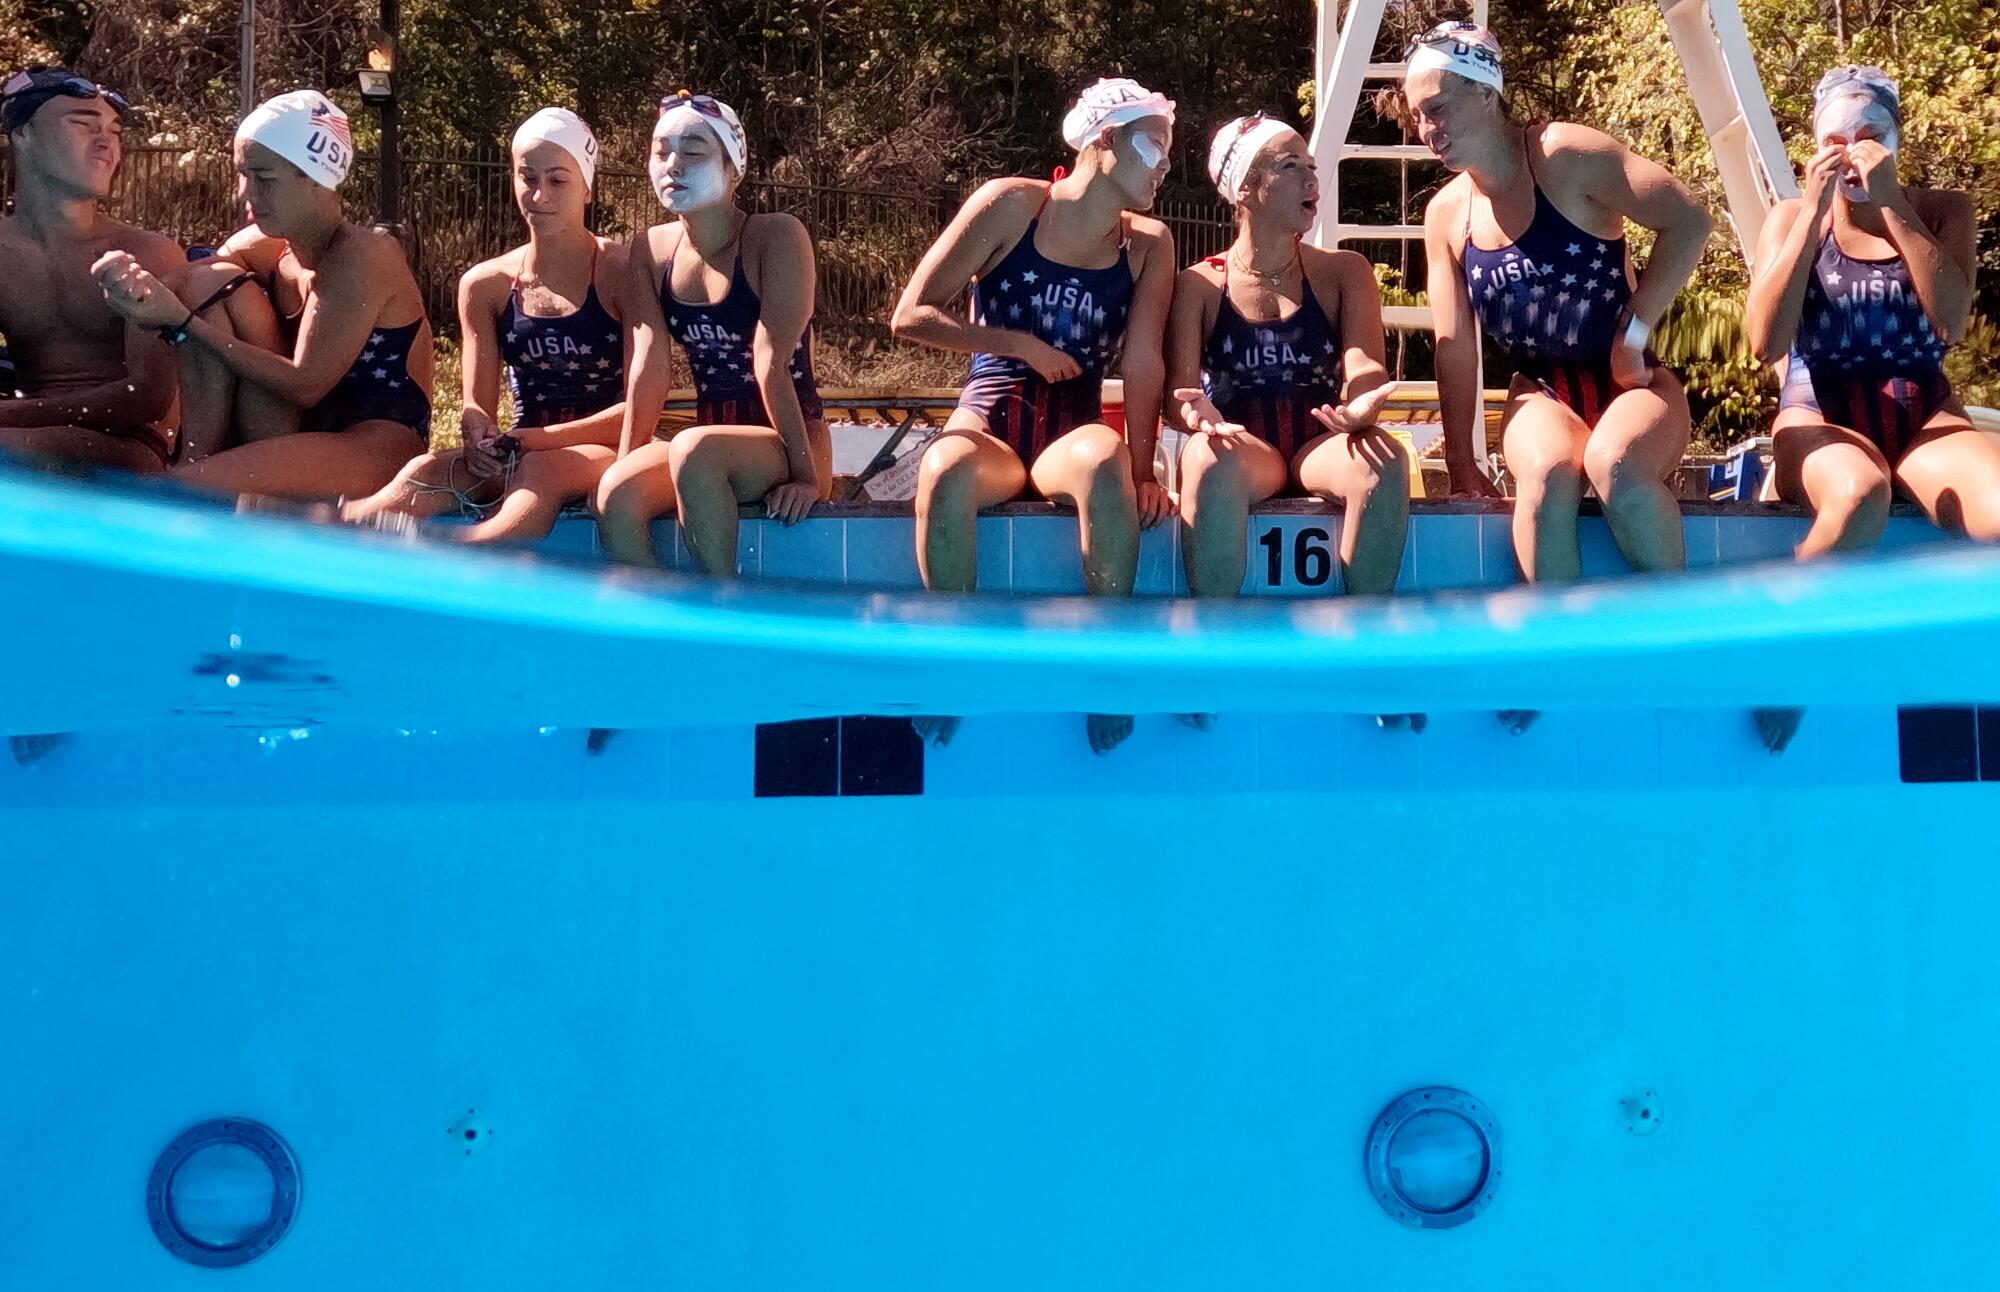 The U.S. Artistic Swimming team members talk poolside during a recent practice at UCLA.